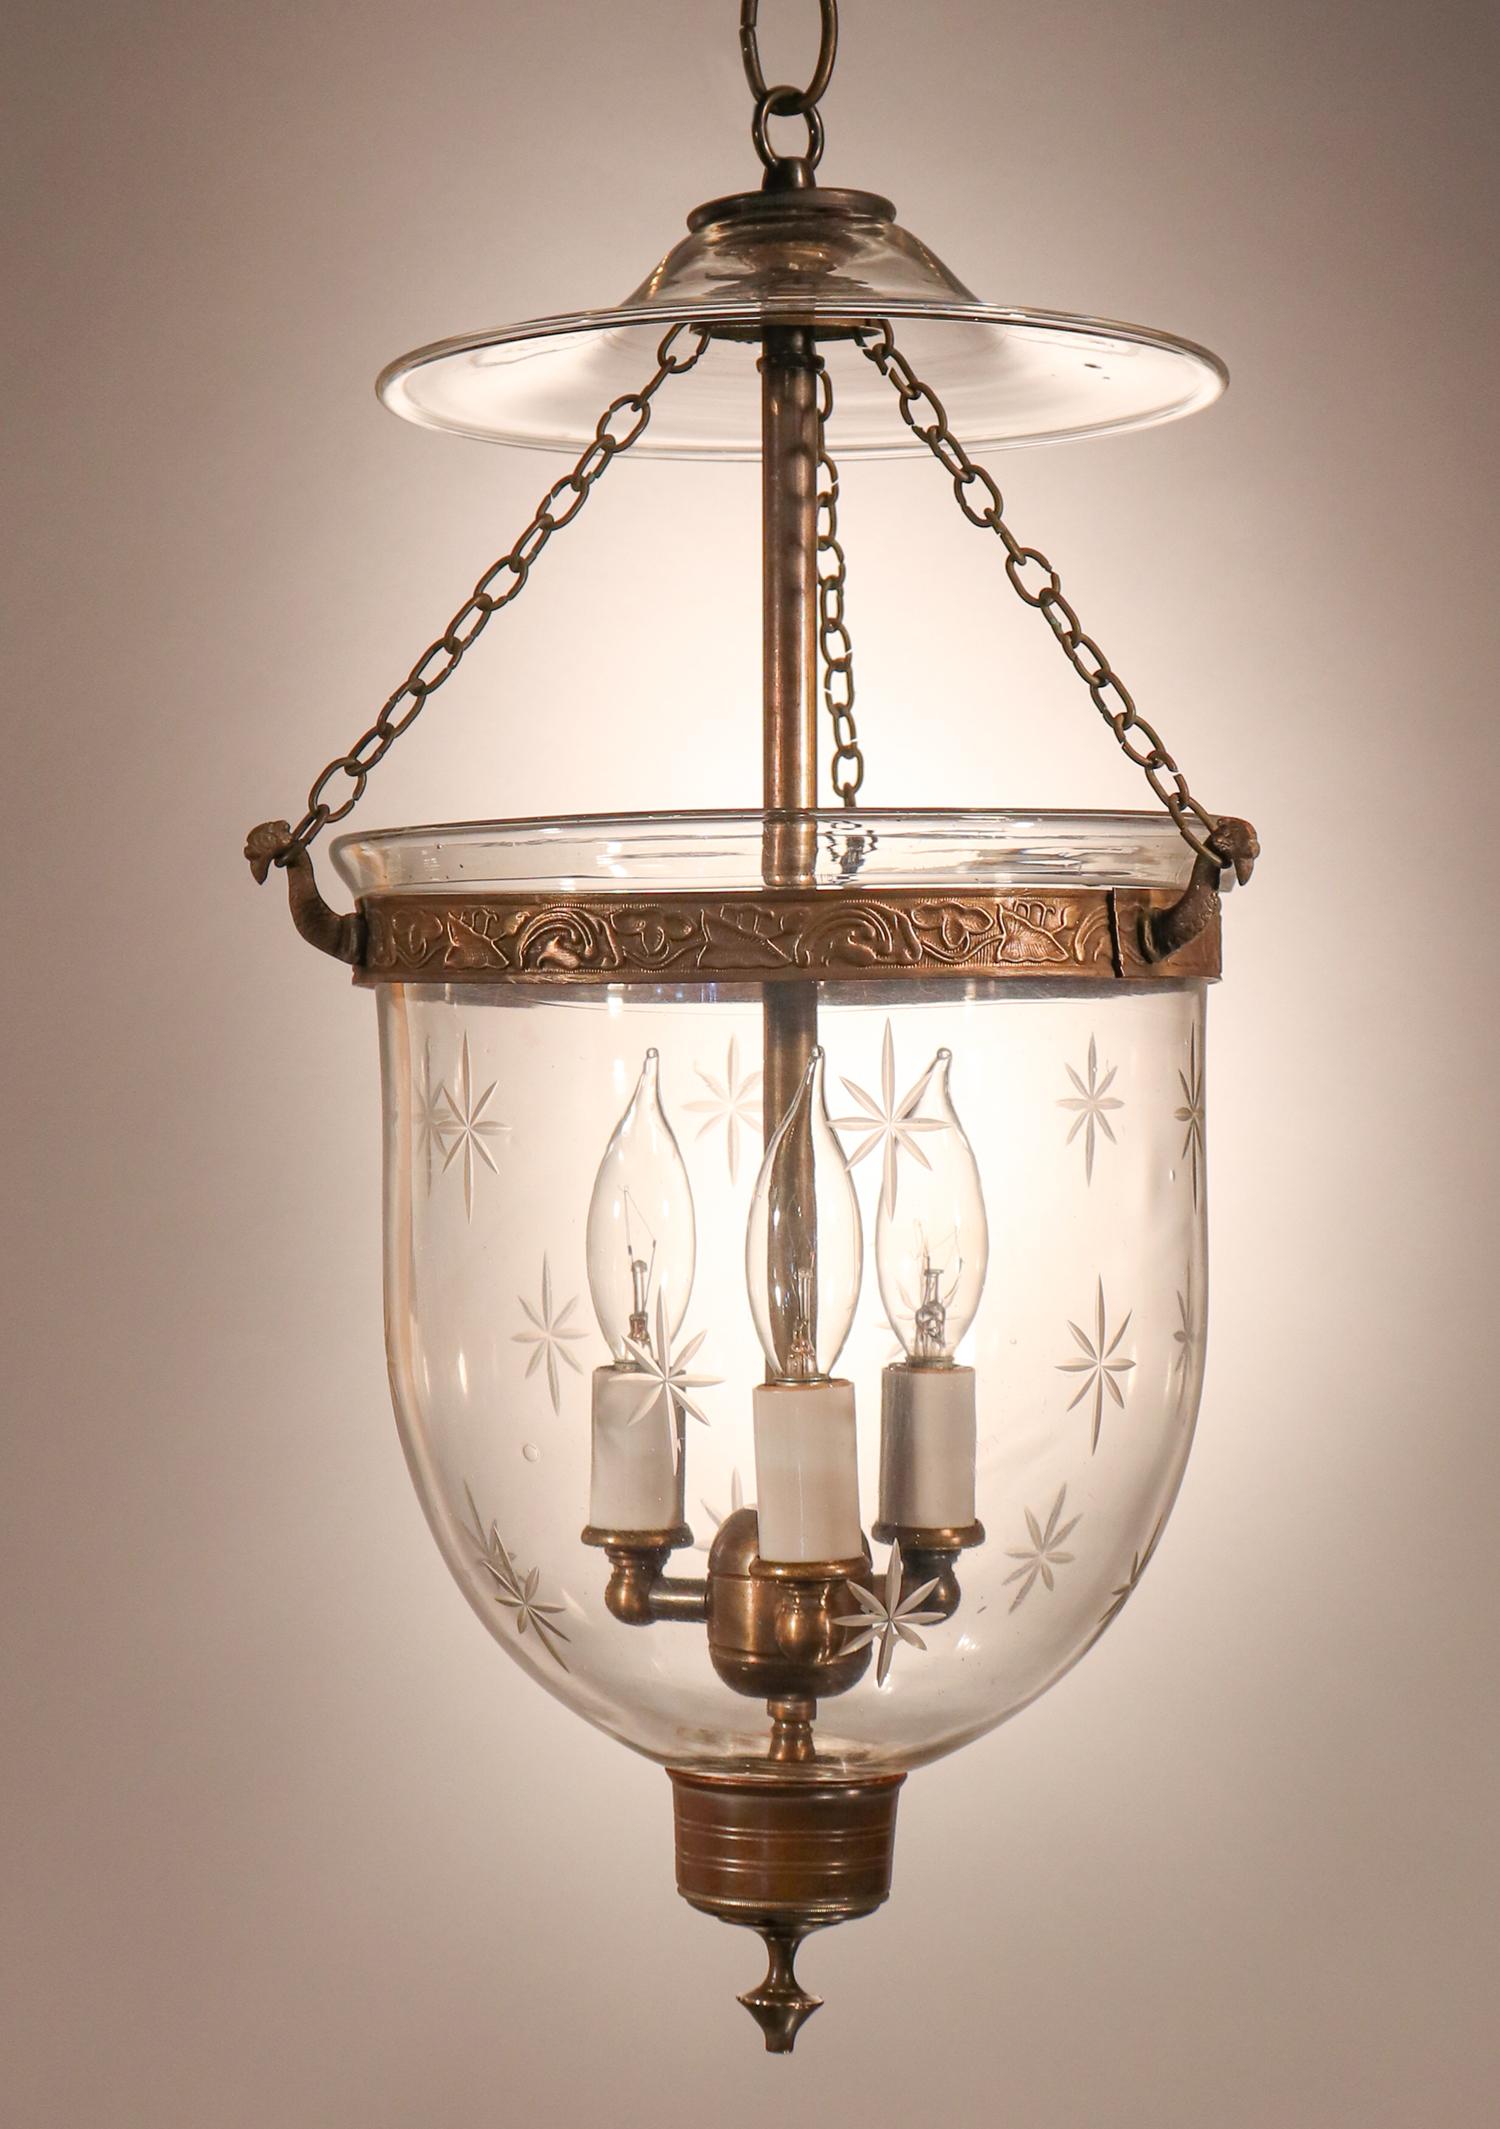 An antique English bell jar lantern with lovely form complemented by a finely etched star motif. This petite, circa 1890 pendant features very good quality hand blown glass complemented by an embossed brass band and simple candleholder base with